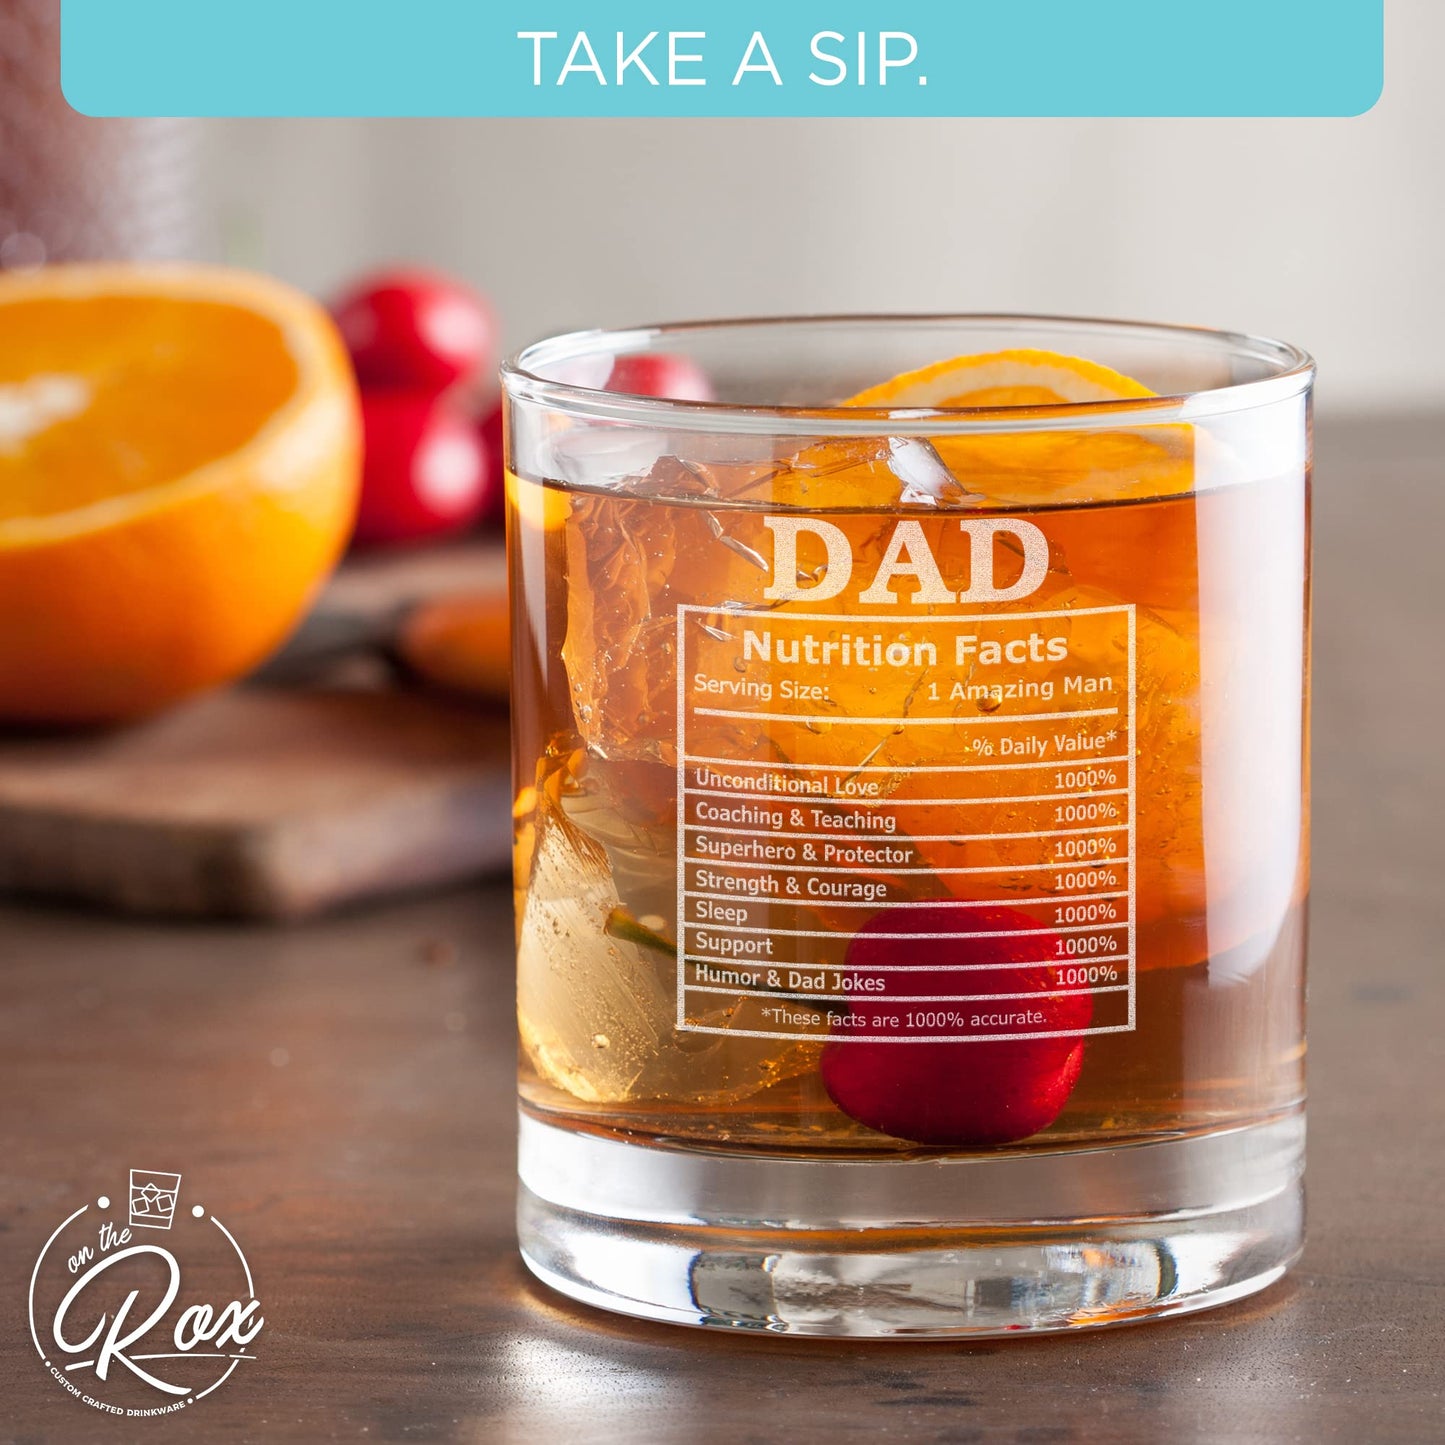 Whiskey Gifts for Dad- 11 Oz "Dad Nutrition" Engraved Whiskey Glass - Father's Day Gift, Dad Birthday Gifts From Daughter, Wife or Son - Bourbon Glass - Old Fashion Glass - 6 Designs To Choose From